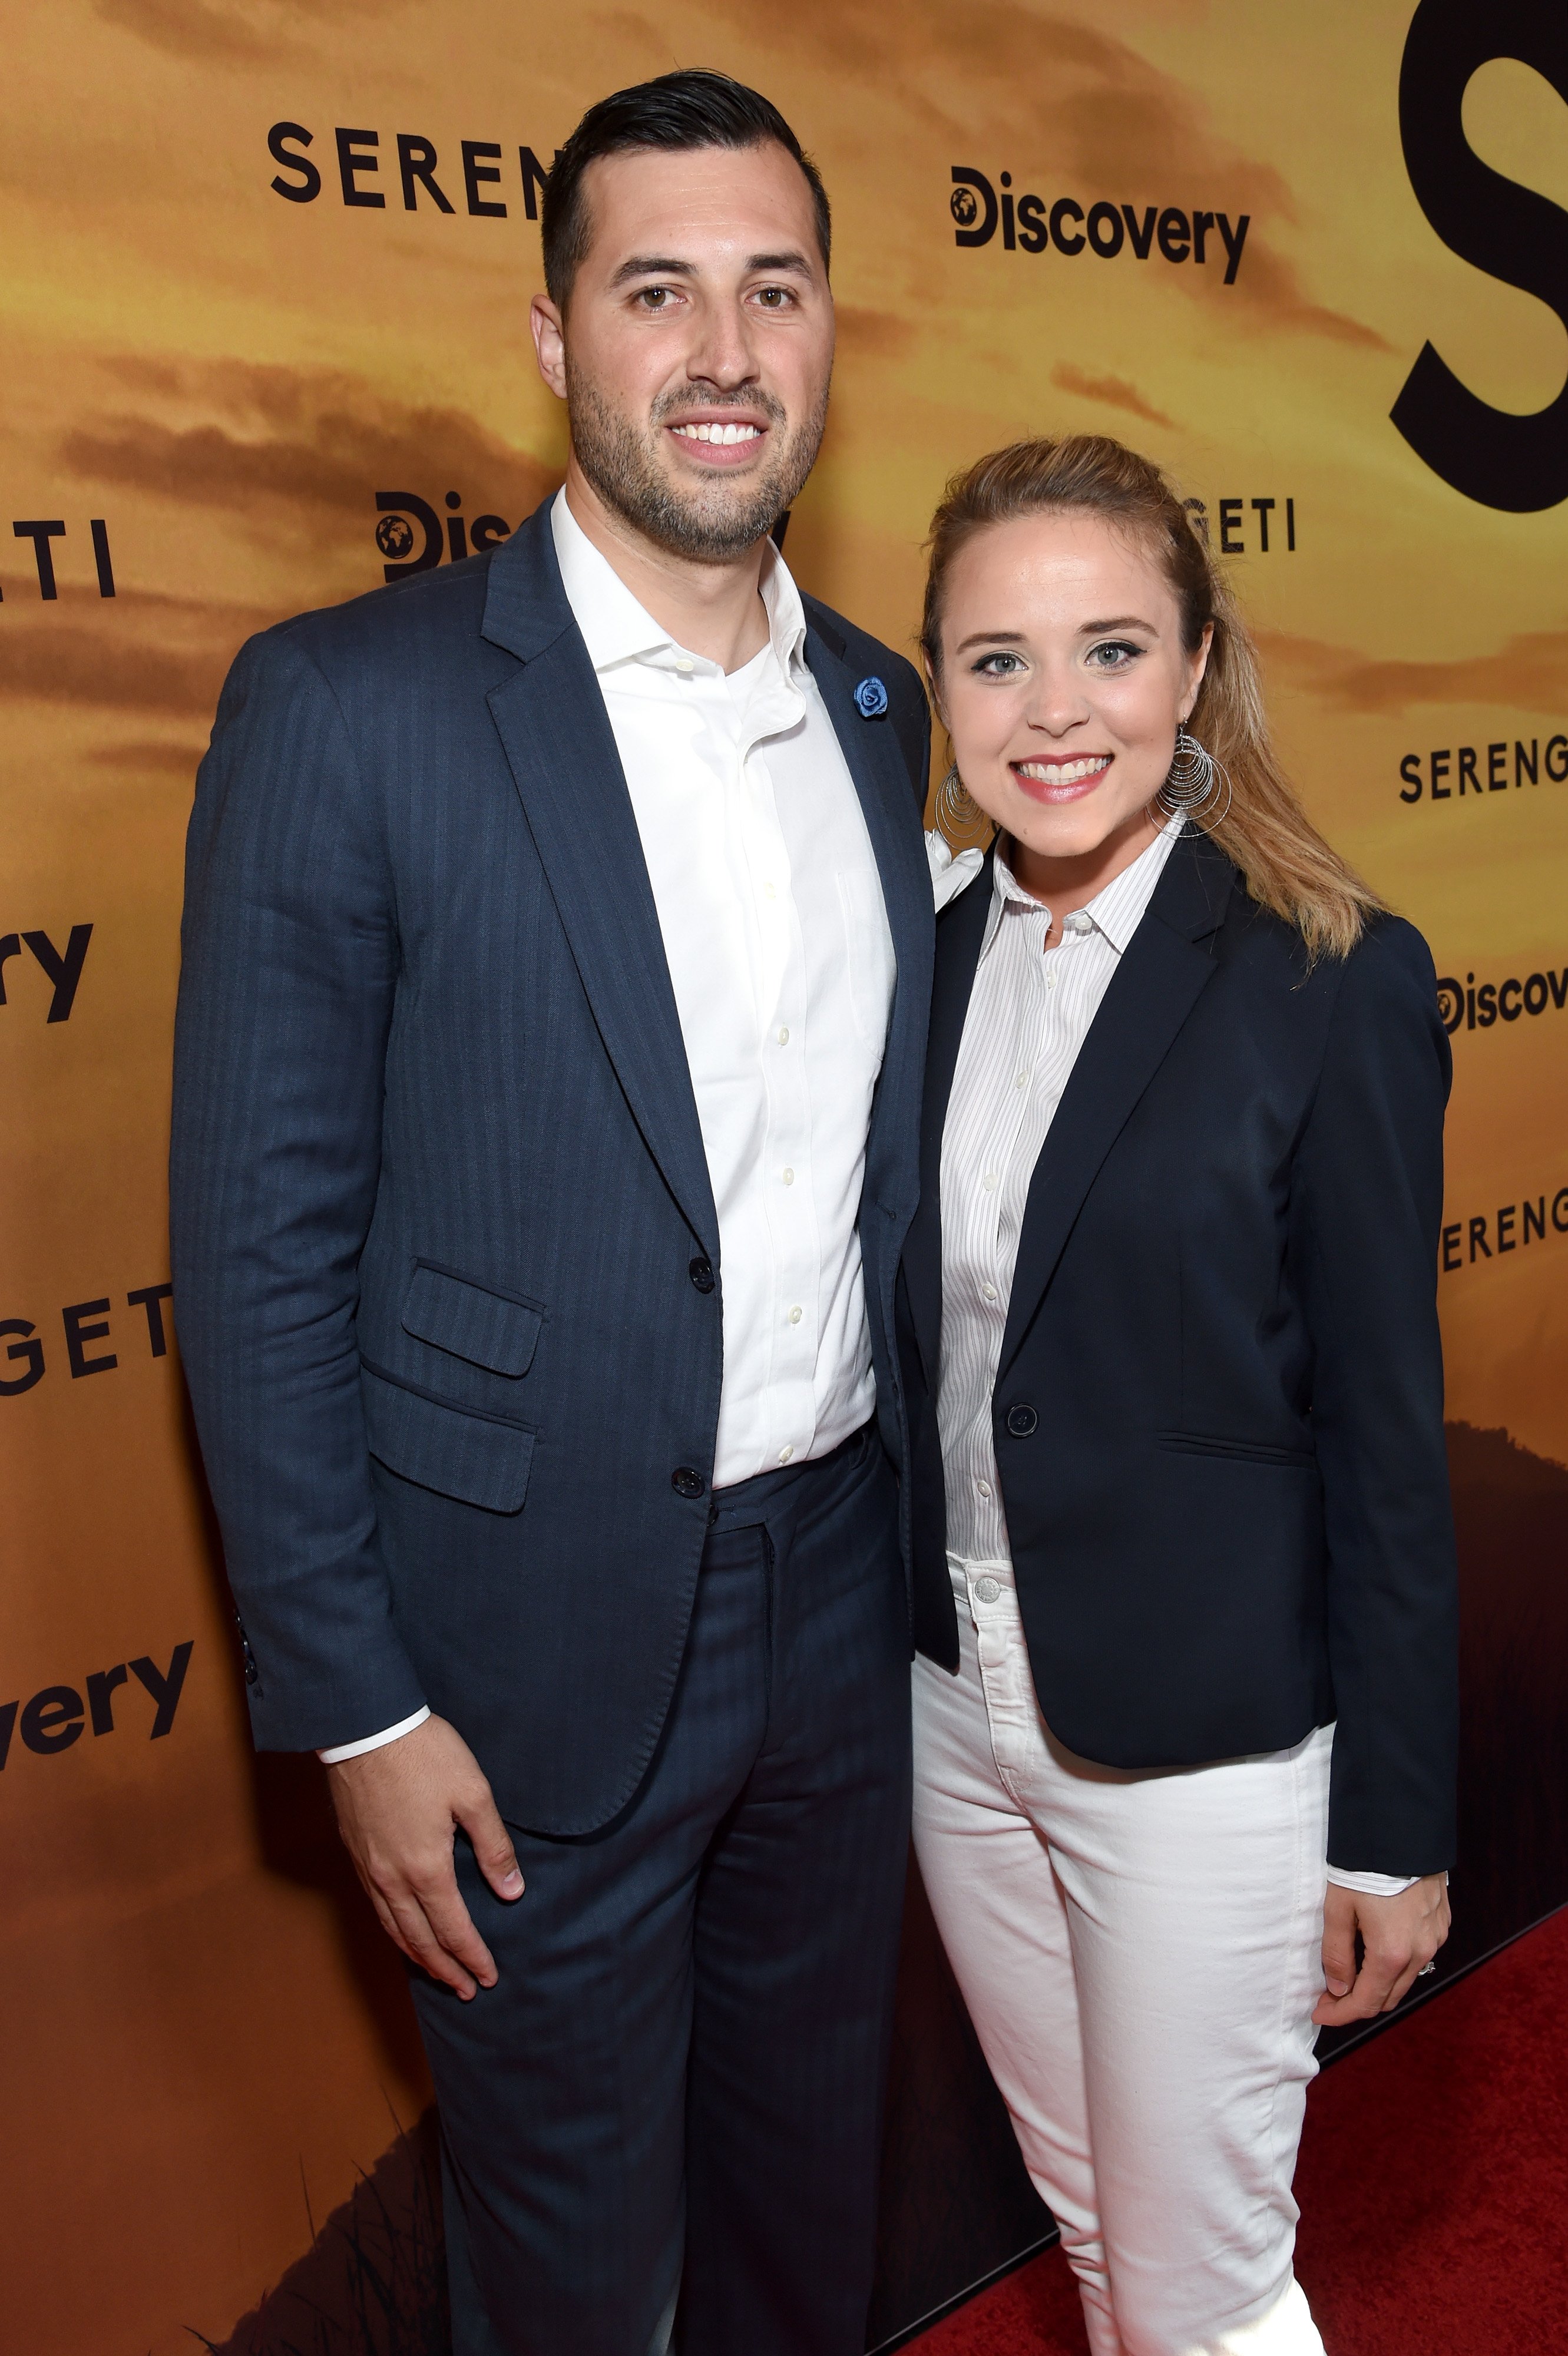 Jinger and Jeremy Vuolo attend the premiere of 'Serengeti' at Wallis Annenberg Center for the Performing Arts in 2019